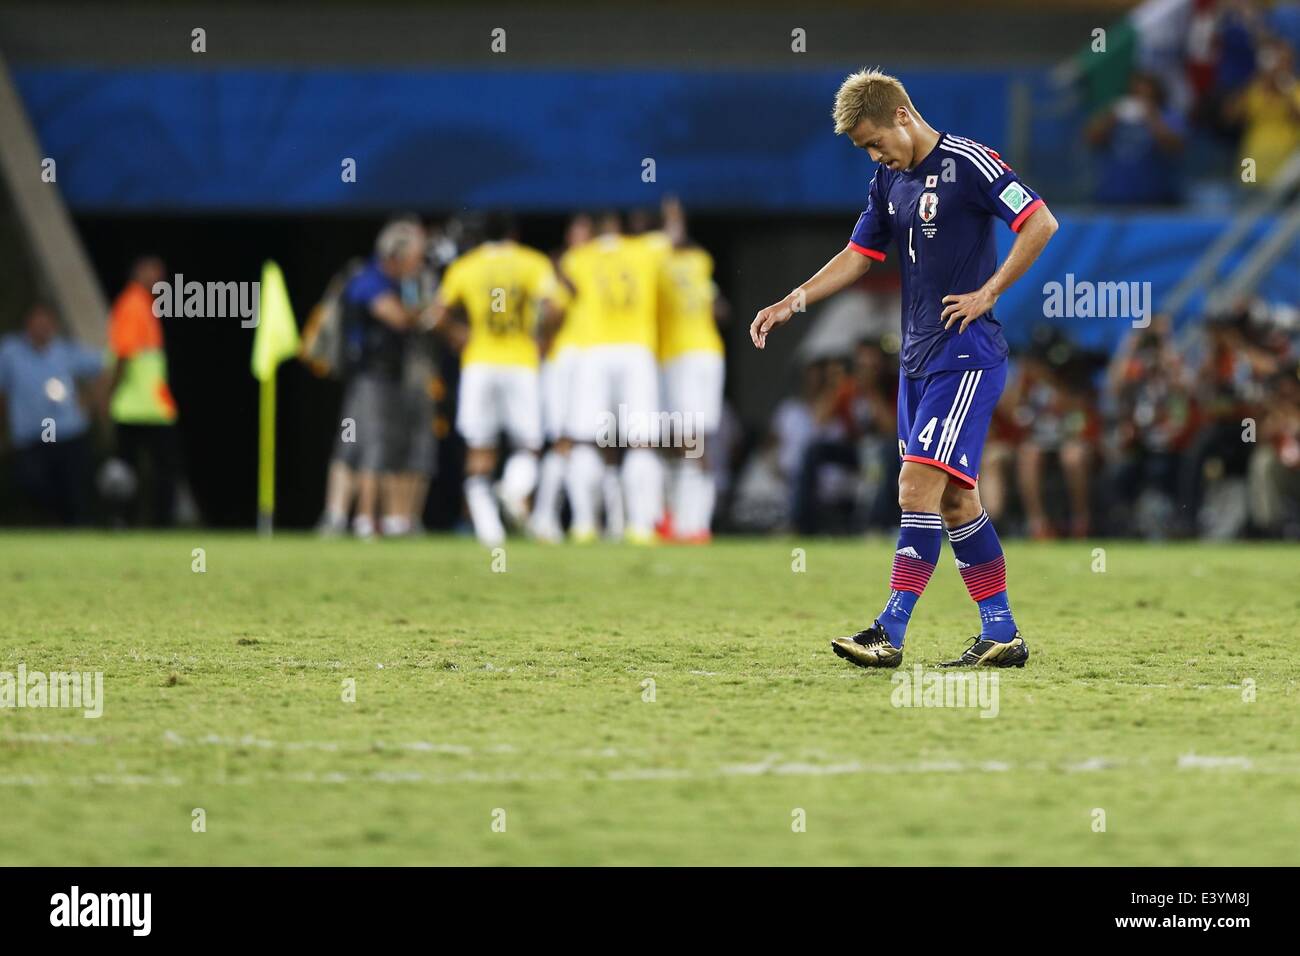 Cuiaba, Brazil. 24th June, 2014. Keisuke Honda (JPN) Football/Soccer : Honda dejected after loss goal on FIFA World Cup Brazil 2014 Group C match between Japan 1-4 Colombia at the Arena Pantanal in Cuiaba, Brazil . © AFLO/Alamy Live News Stock Photo